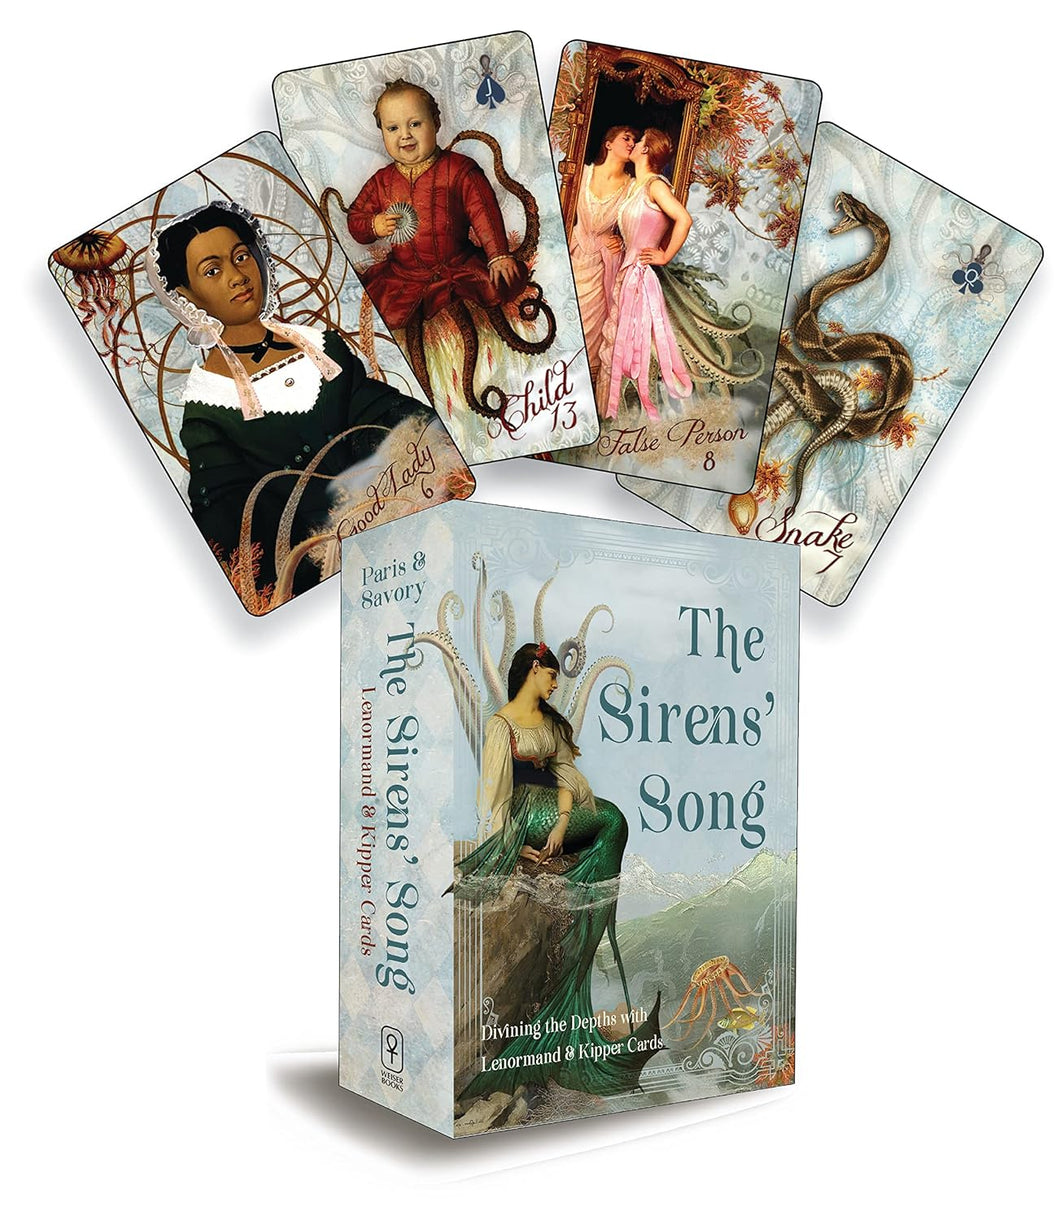 The Sirens’ Song: Divining the Depths with Lenormand & Kipper Cards (Includes 40 Lenormand Cards, 38 Kipper Cards & 144-Page Full Color Guidebook)